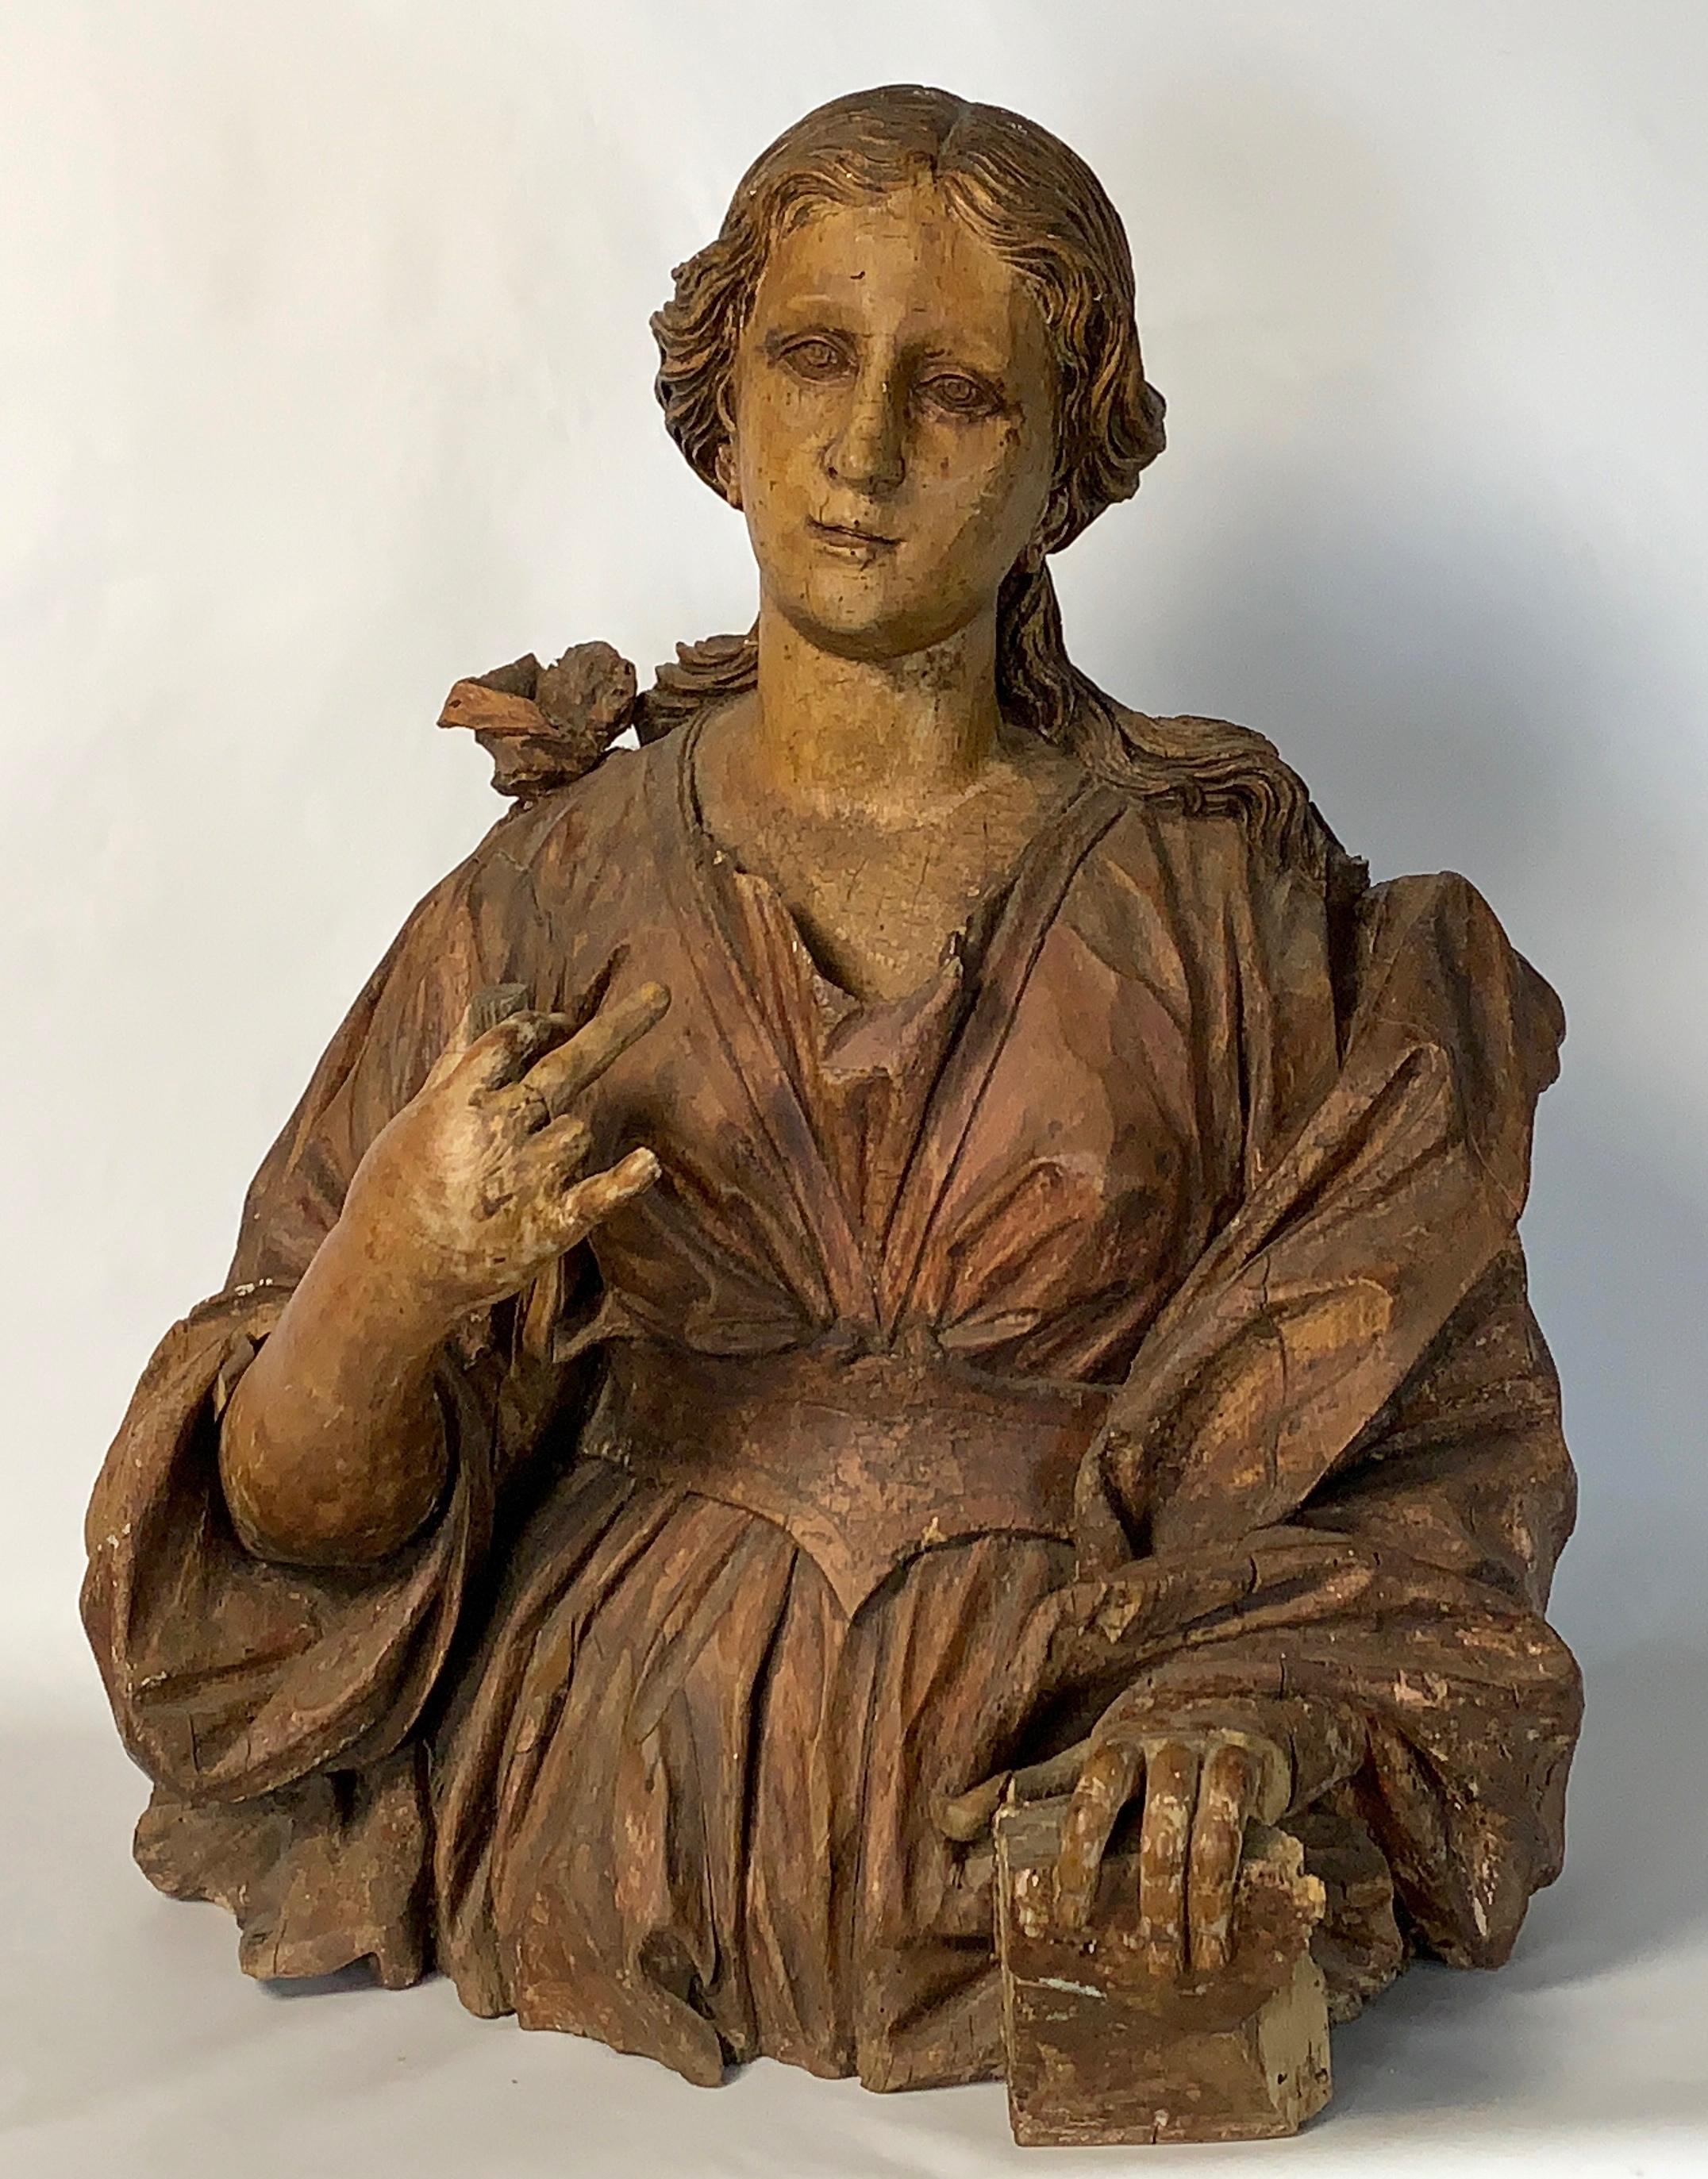 An exceptional mid-18th century life-sized Italian carved wooden bust of a beautiful young woman with traces of original paint.